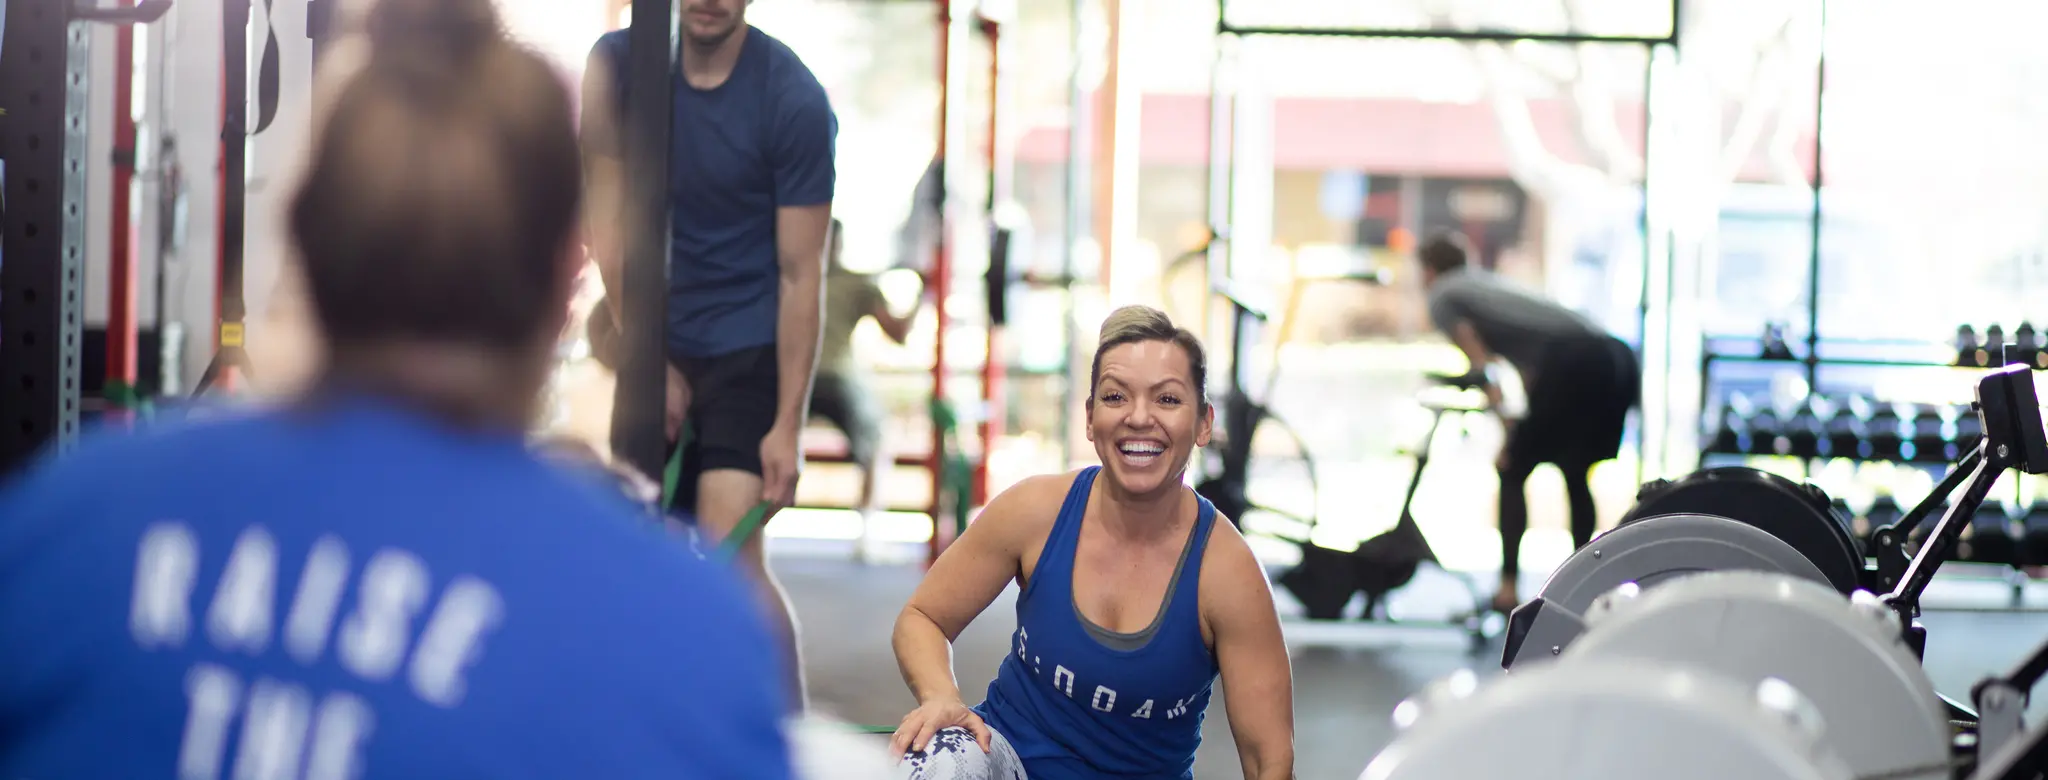 woman smiling and man working out in gym